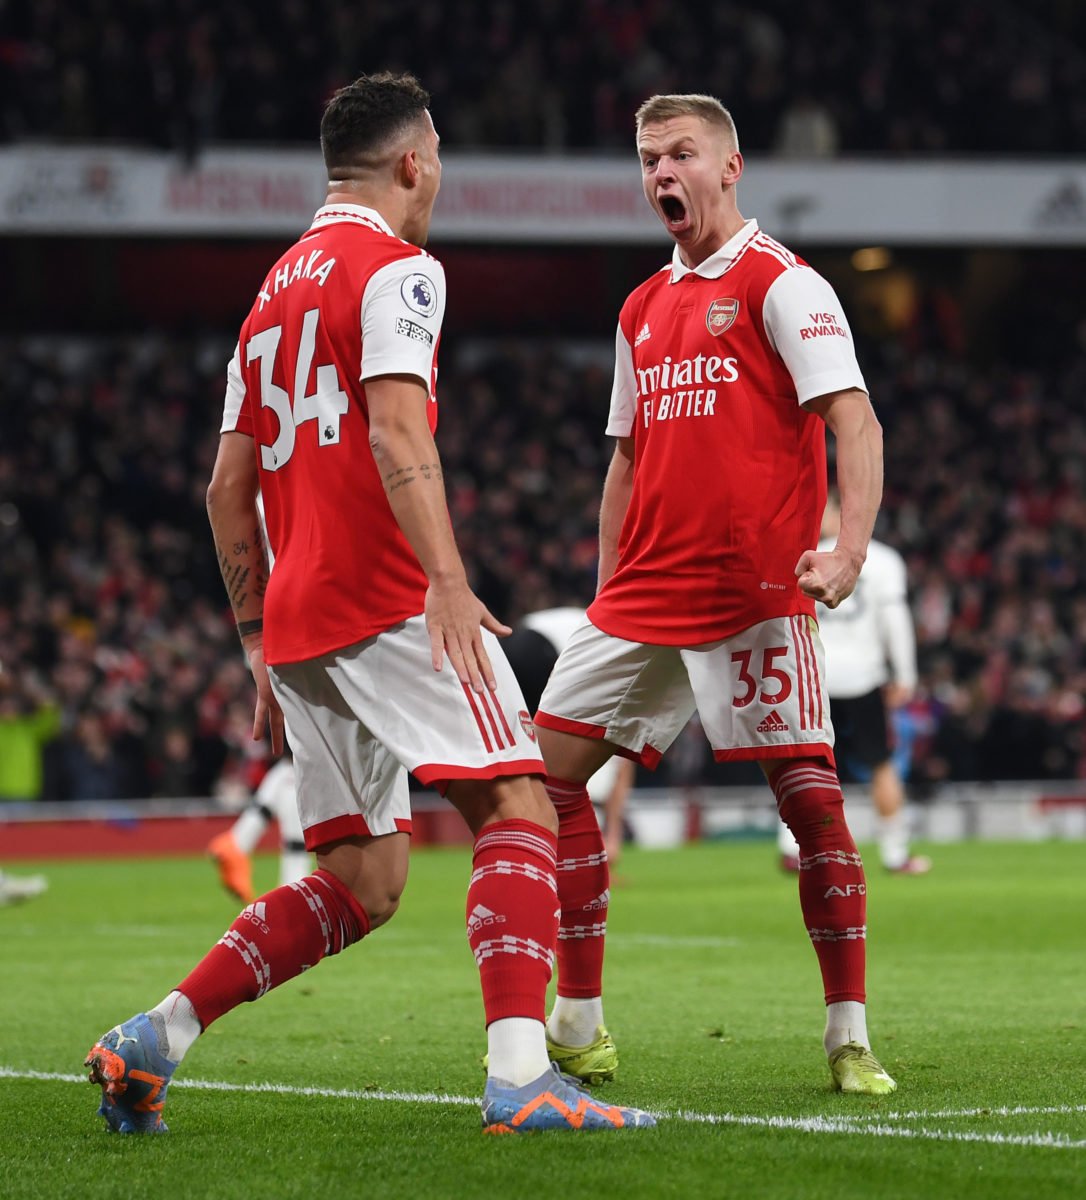 Premier League pundit lauds 'breathtaking' piece of play by Granit Xhaka during Arsenal v Palace